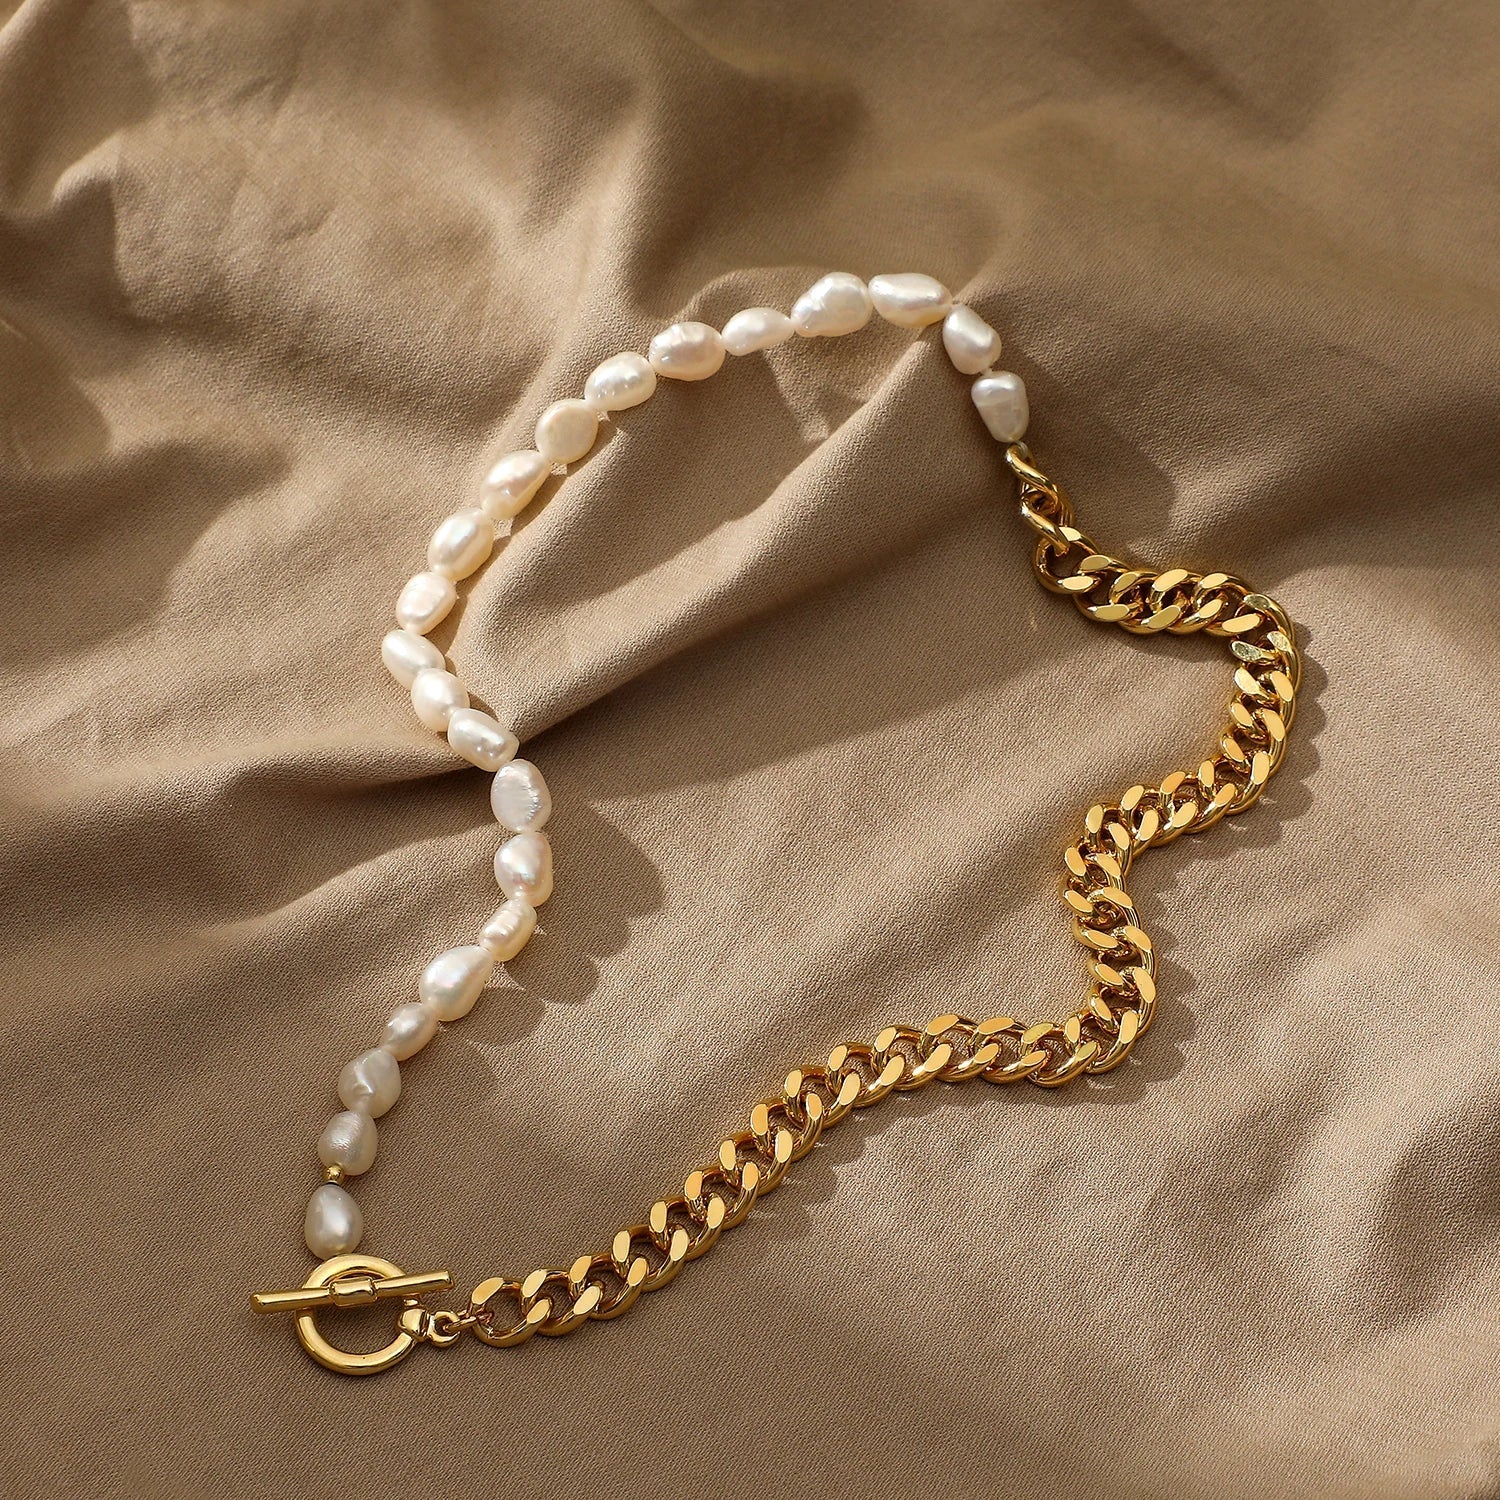 Half Chain Half Natural Pearl Womens Necklace Set With Earrings Gold White  | eBay